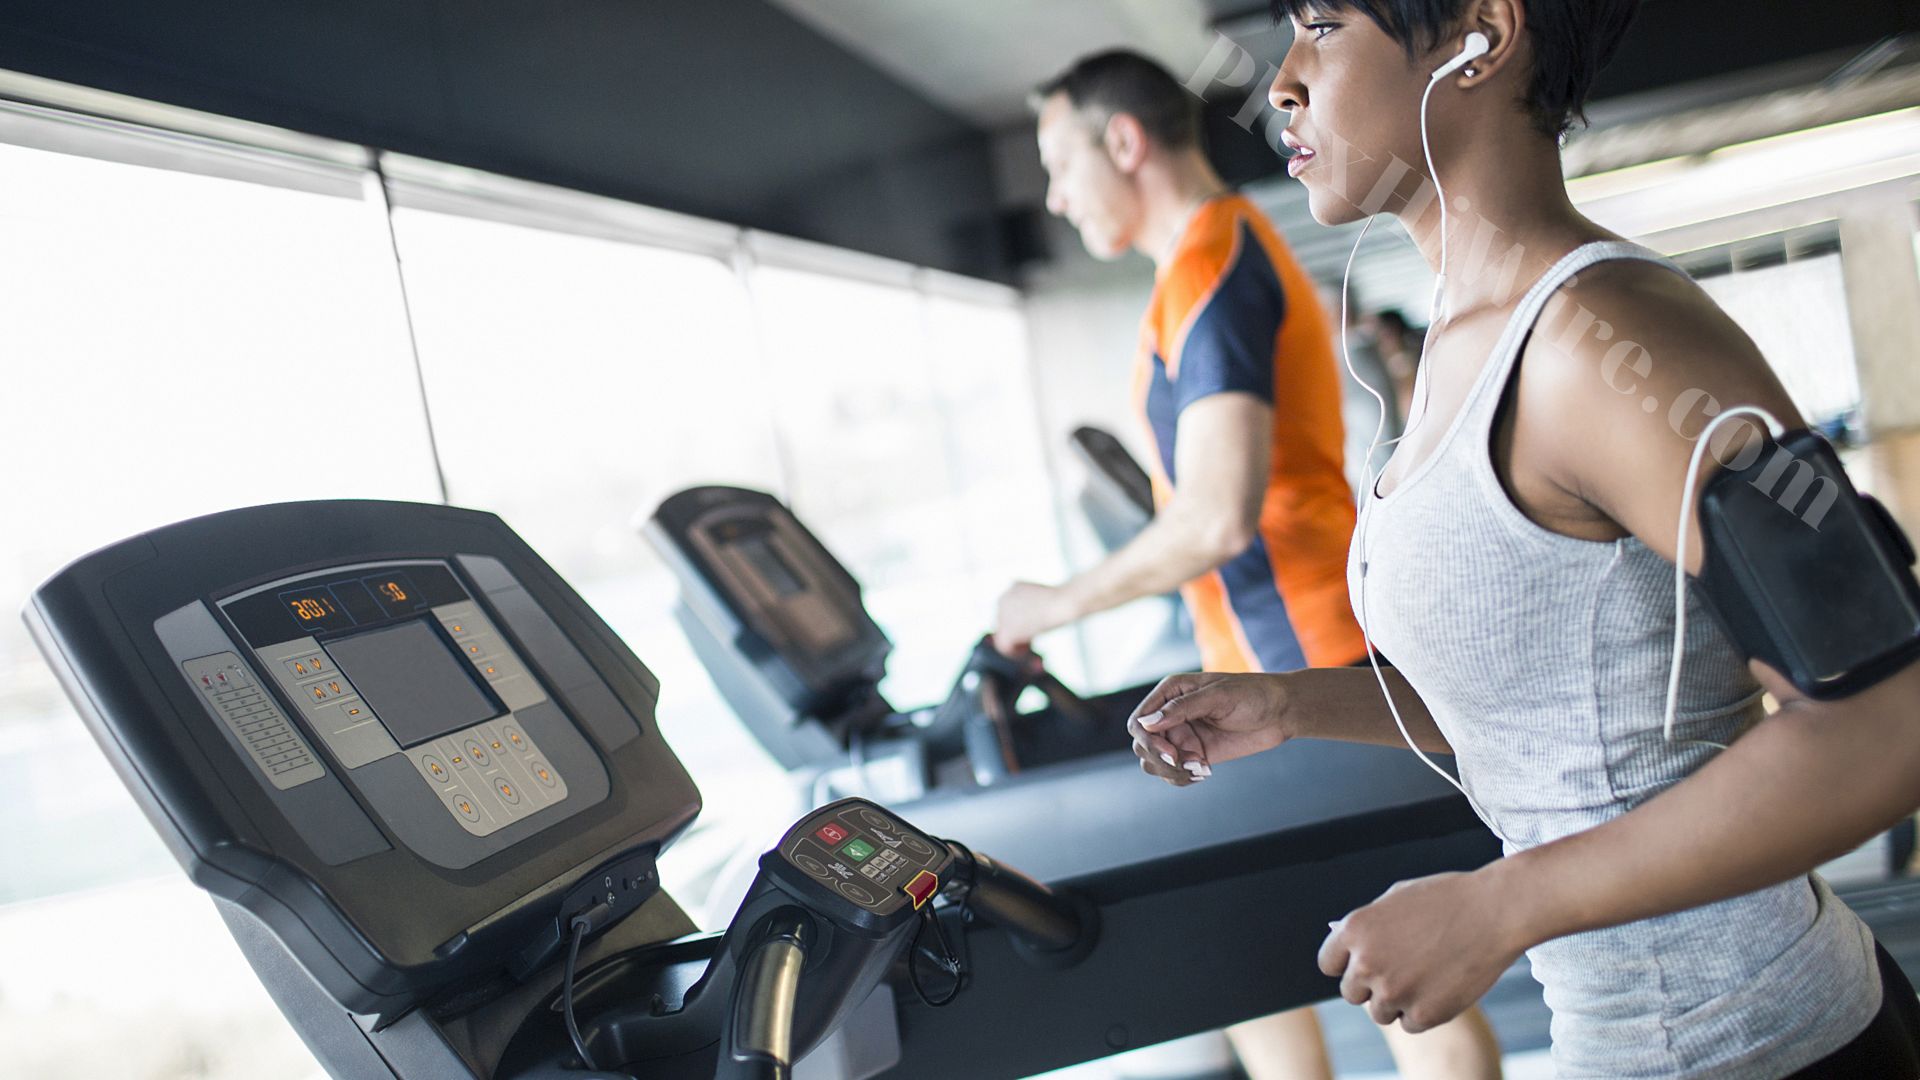 What are The Side Effects of Using a Treadmill?